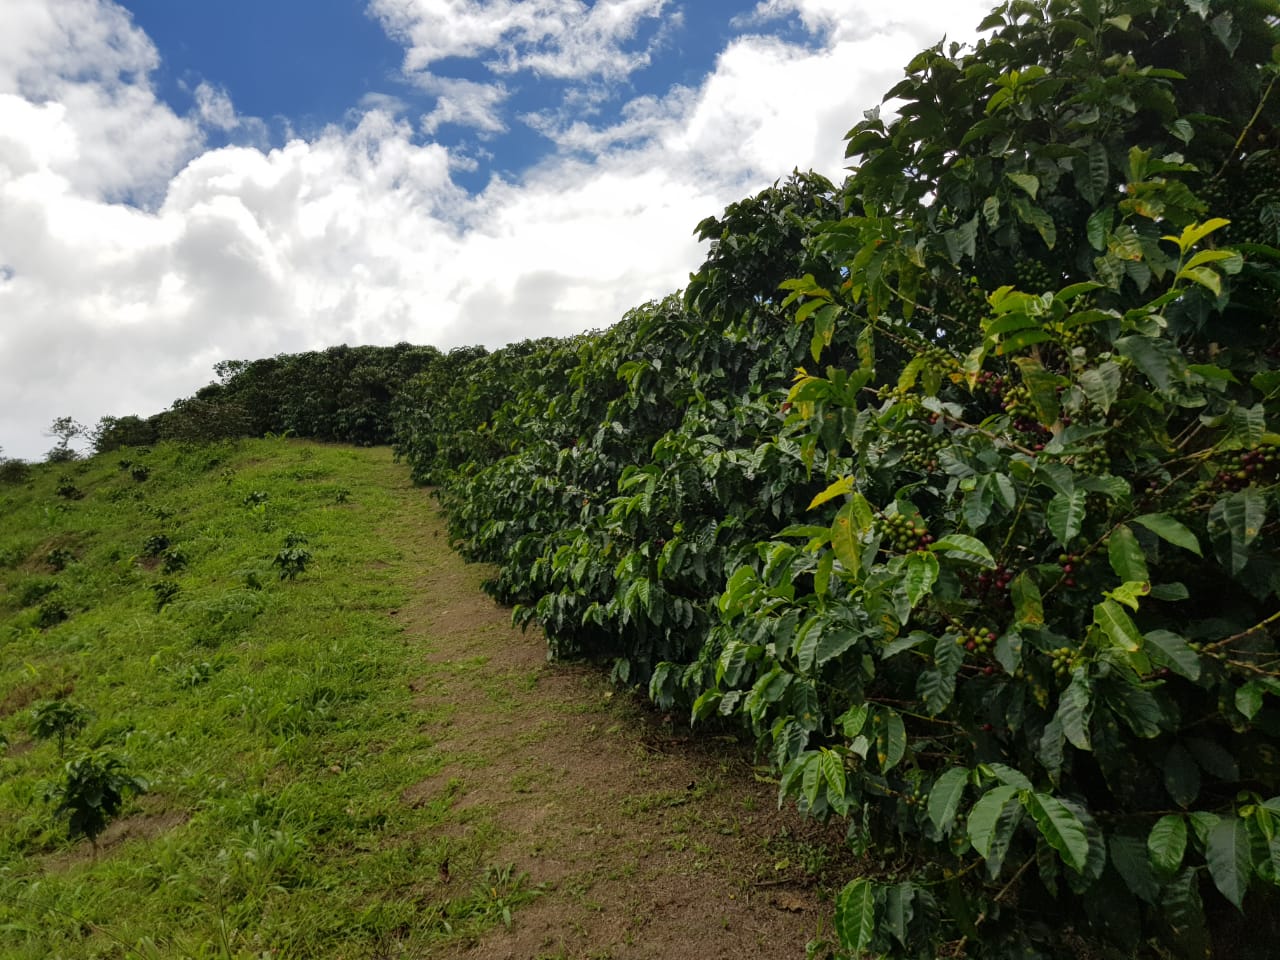 Colombia - Monteblanco - Tropical - Old World Coffee Roasters